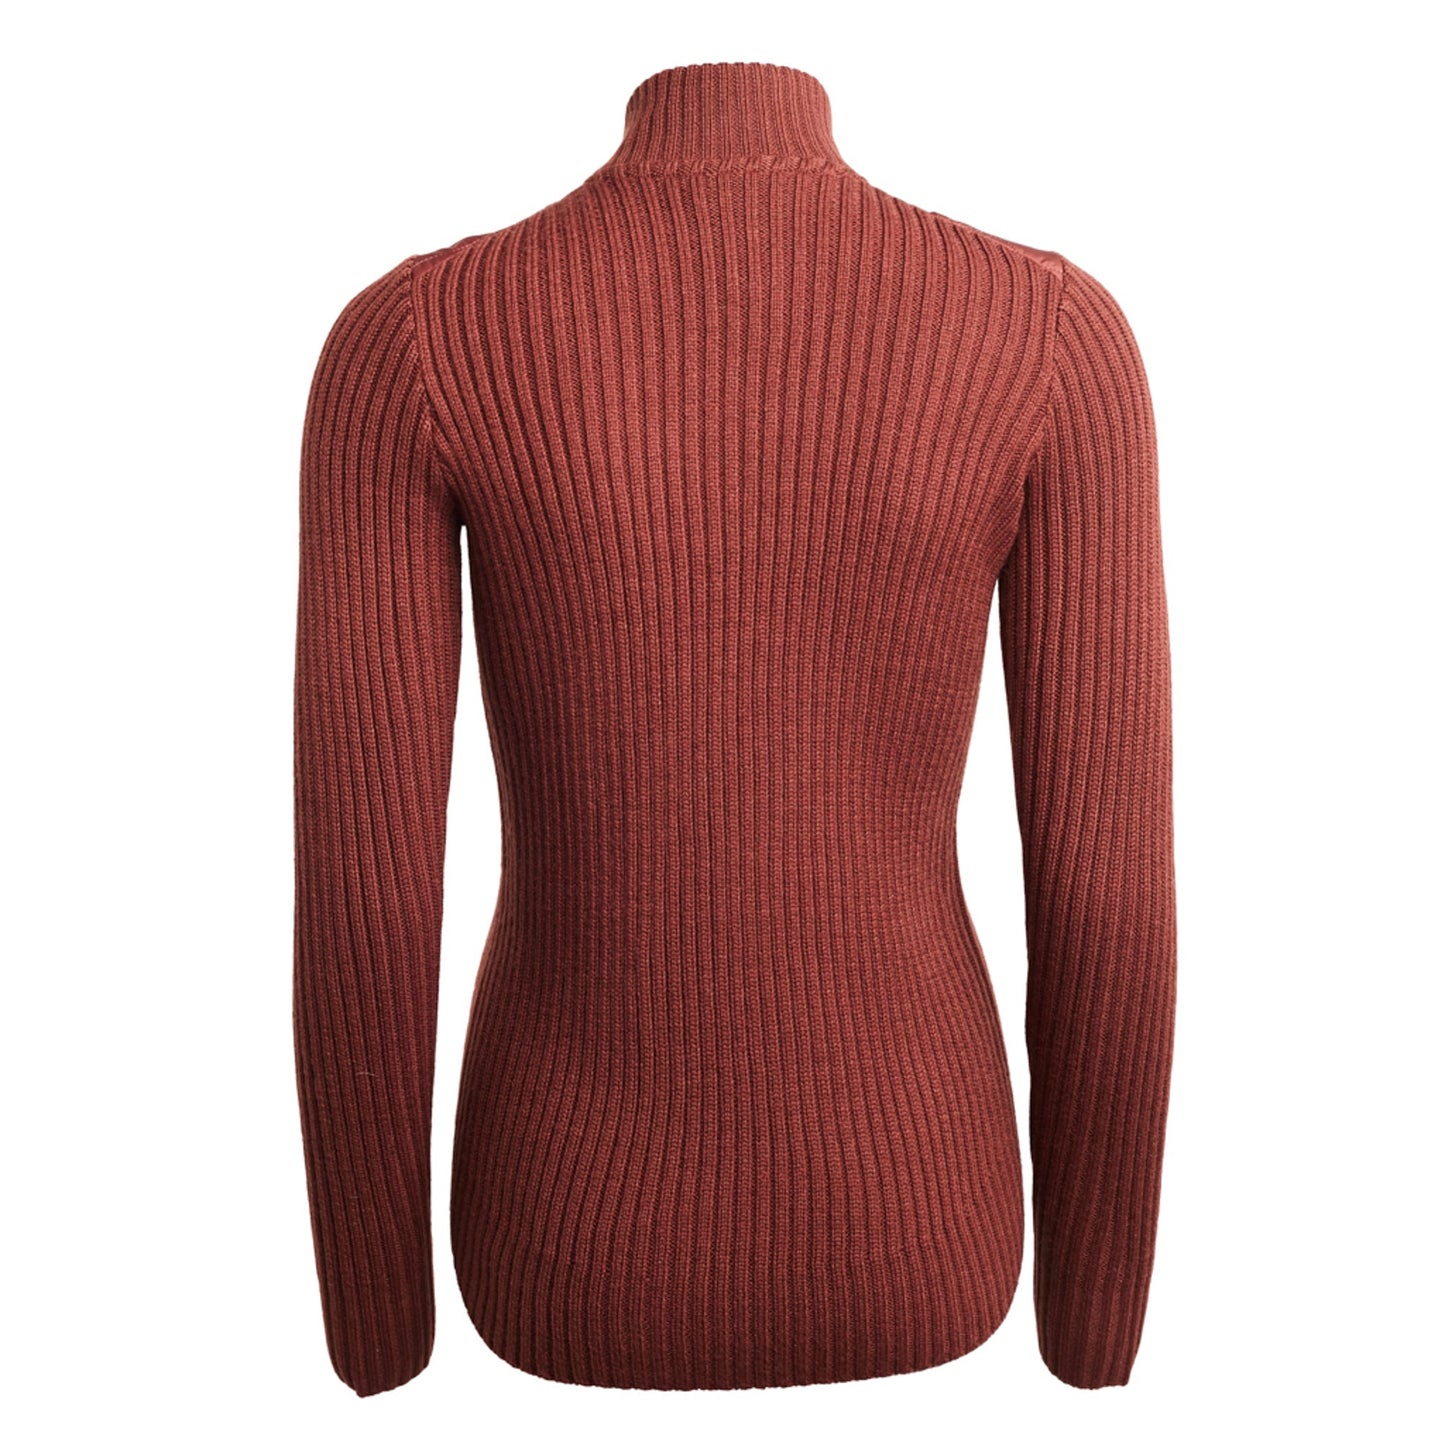 KLSaffron Ladies Knit with Padded Front